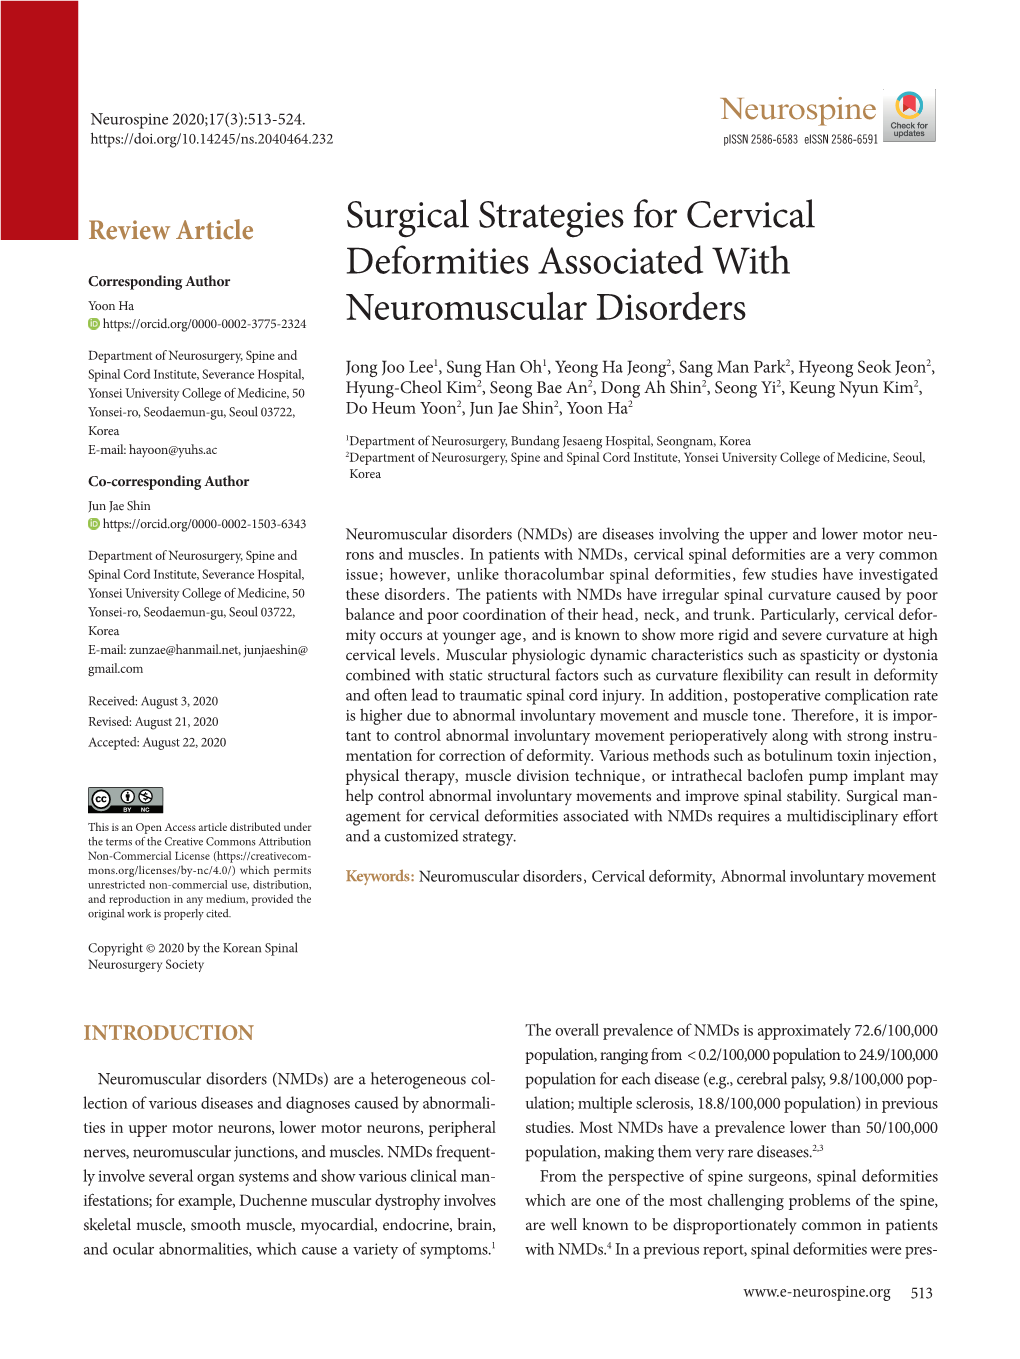 Surgical Strategies for Cervical Deformities Associated With